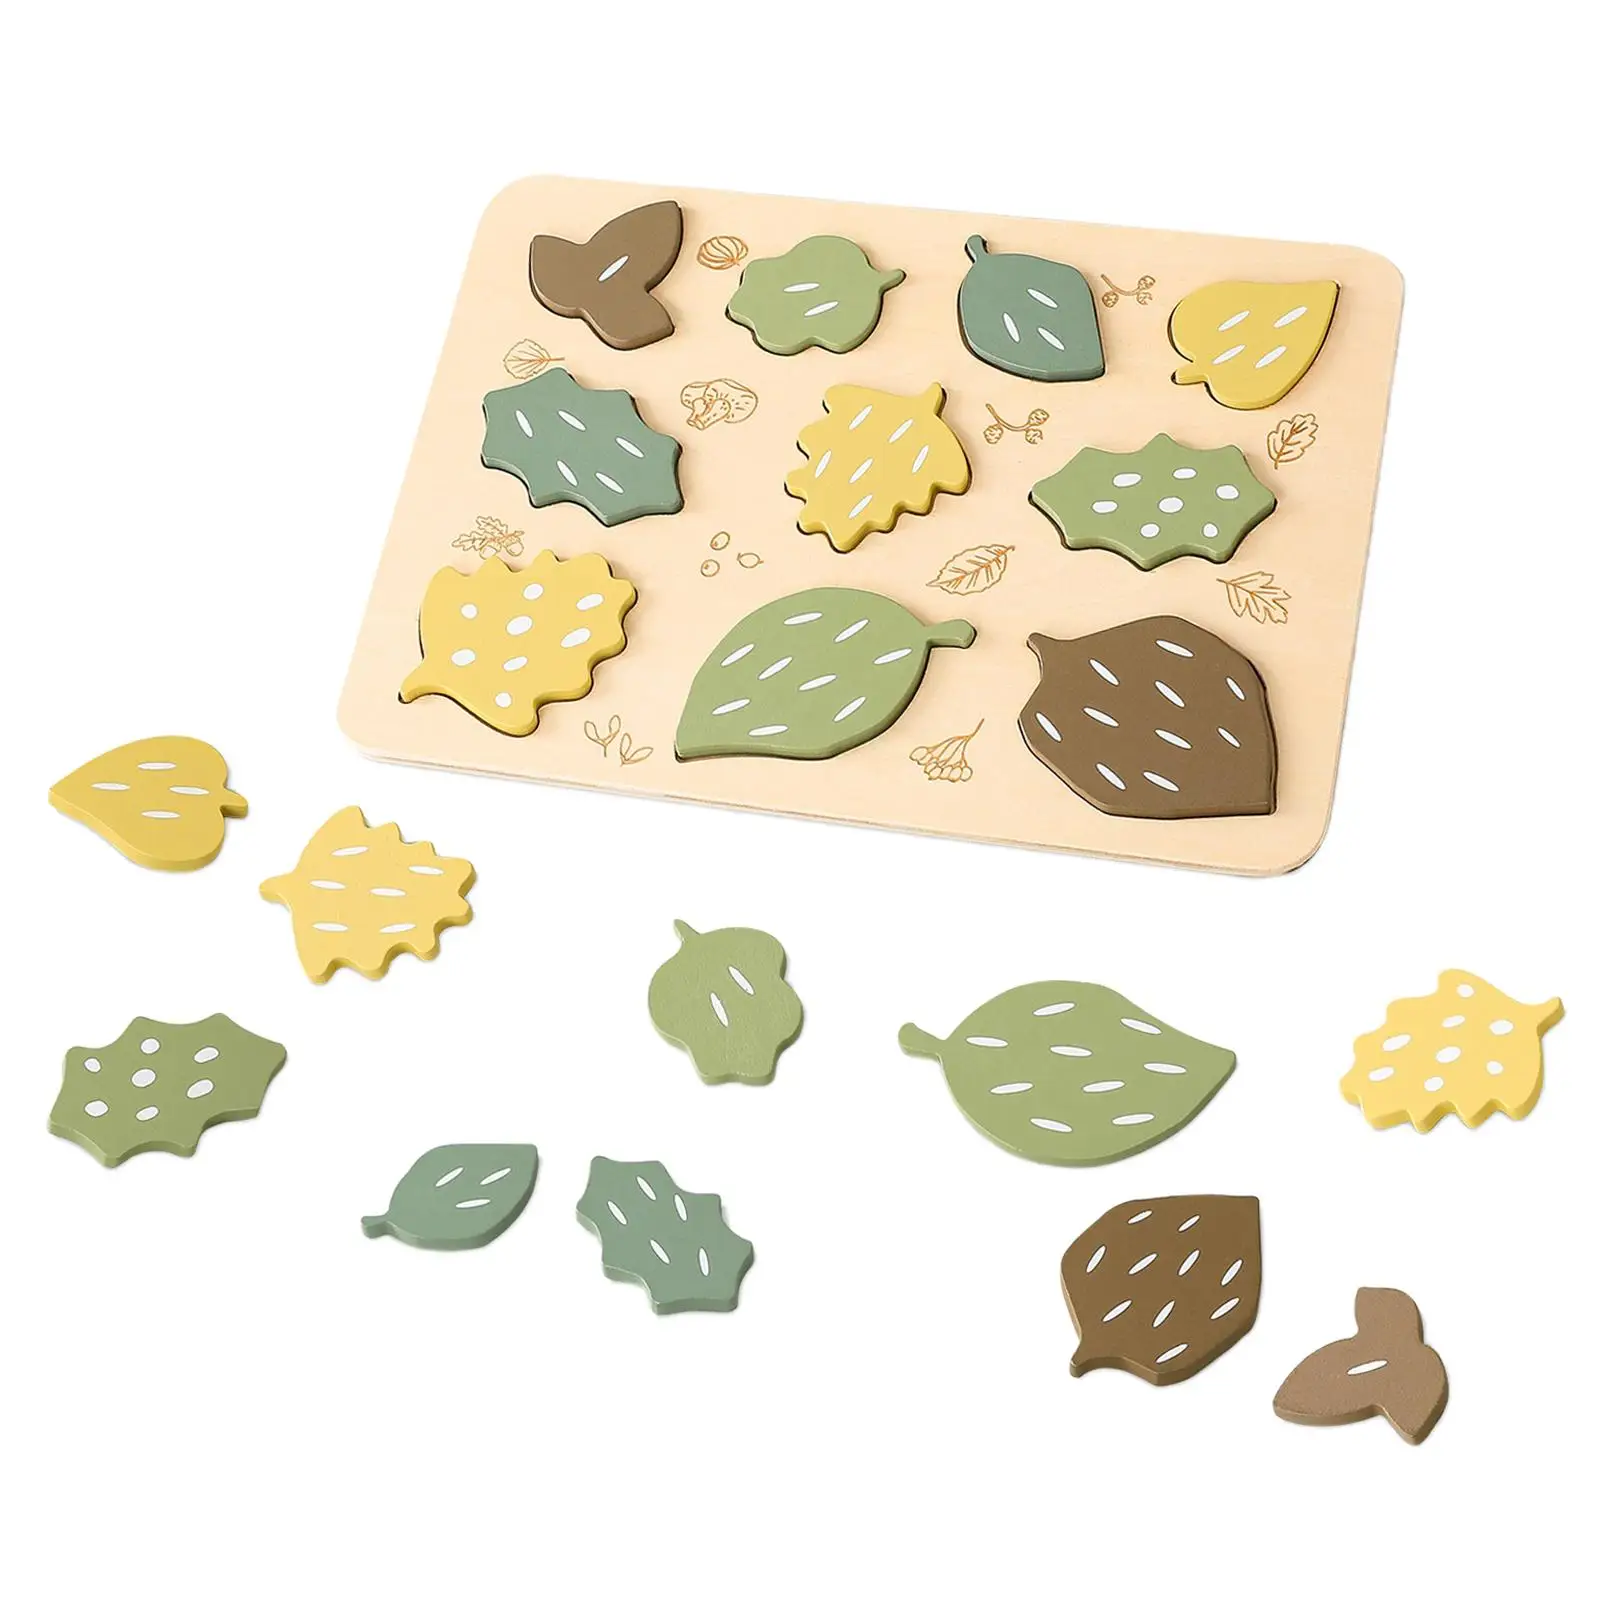 Wooden Leaf Jigsaw Puzzles Counting Puzzle Hand Eye Coordination Fine Motor Skill Stacking Blocks for Preschool Kids Toddlers